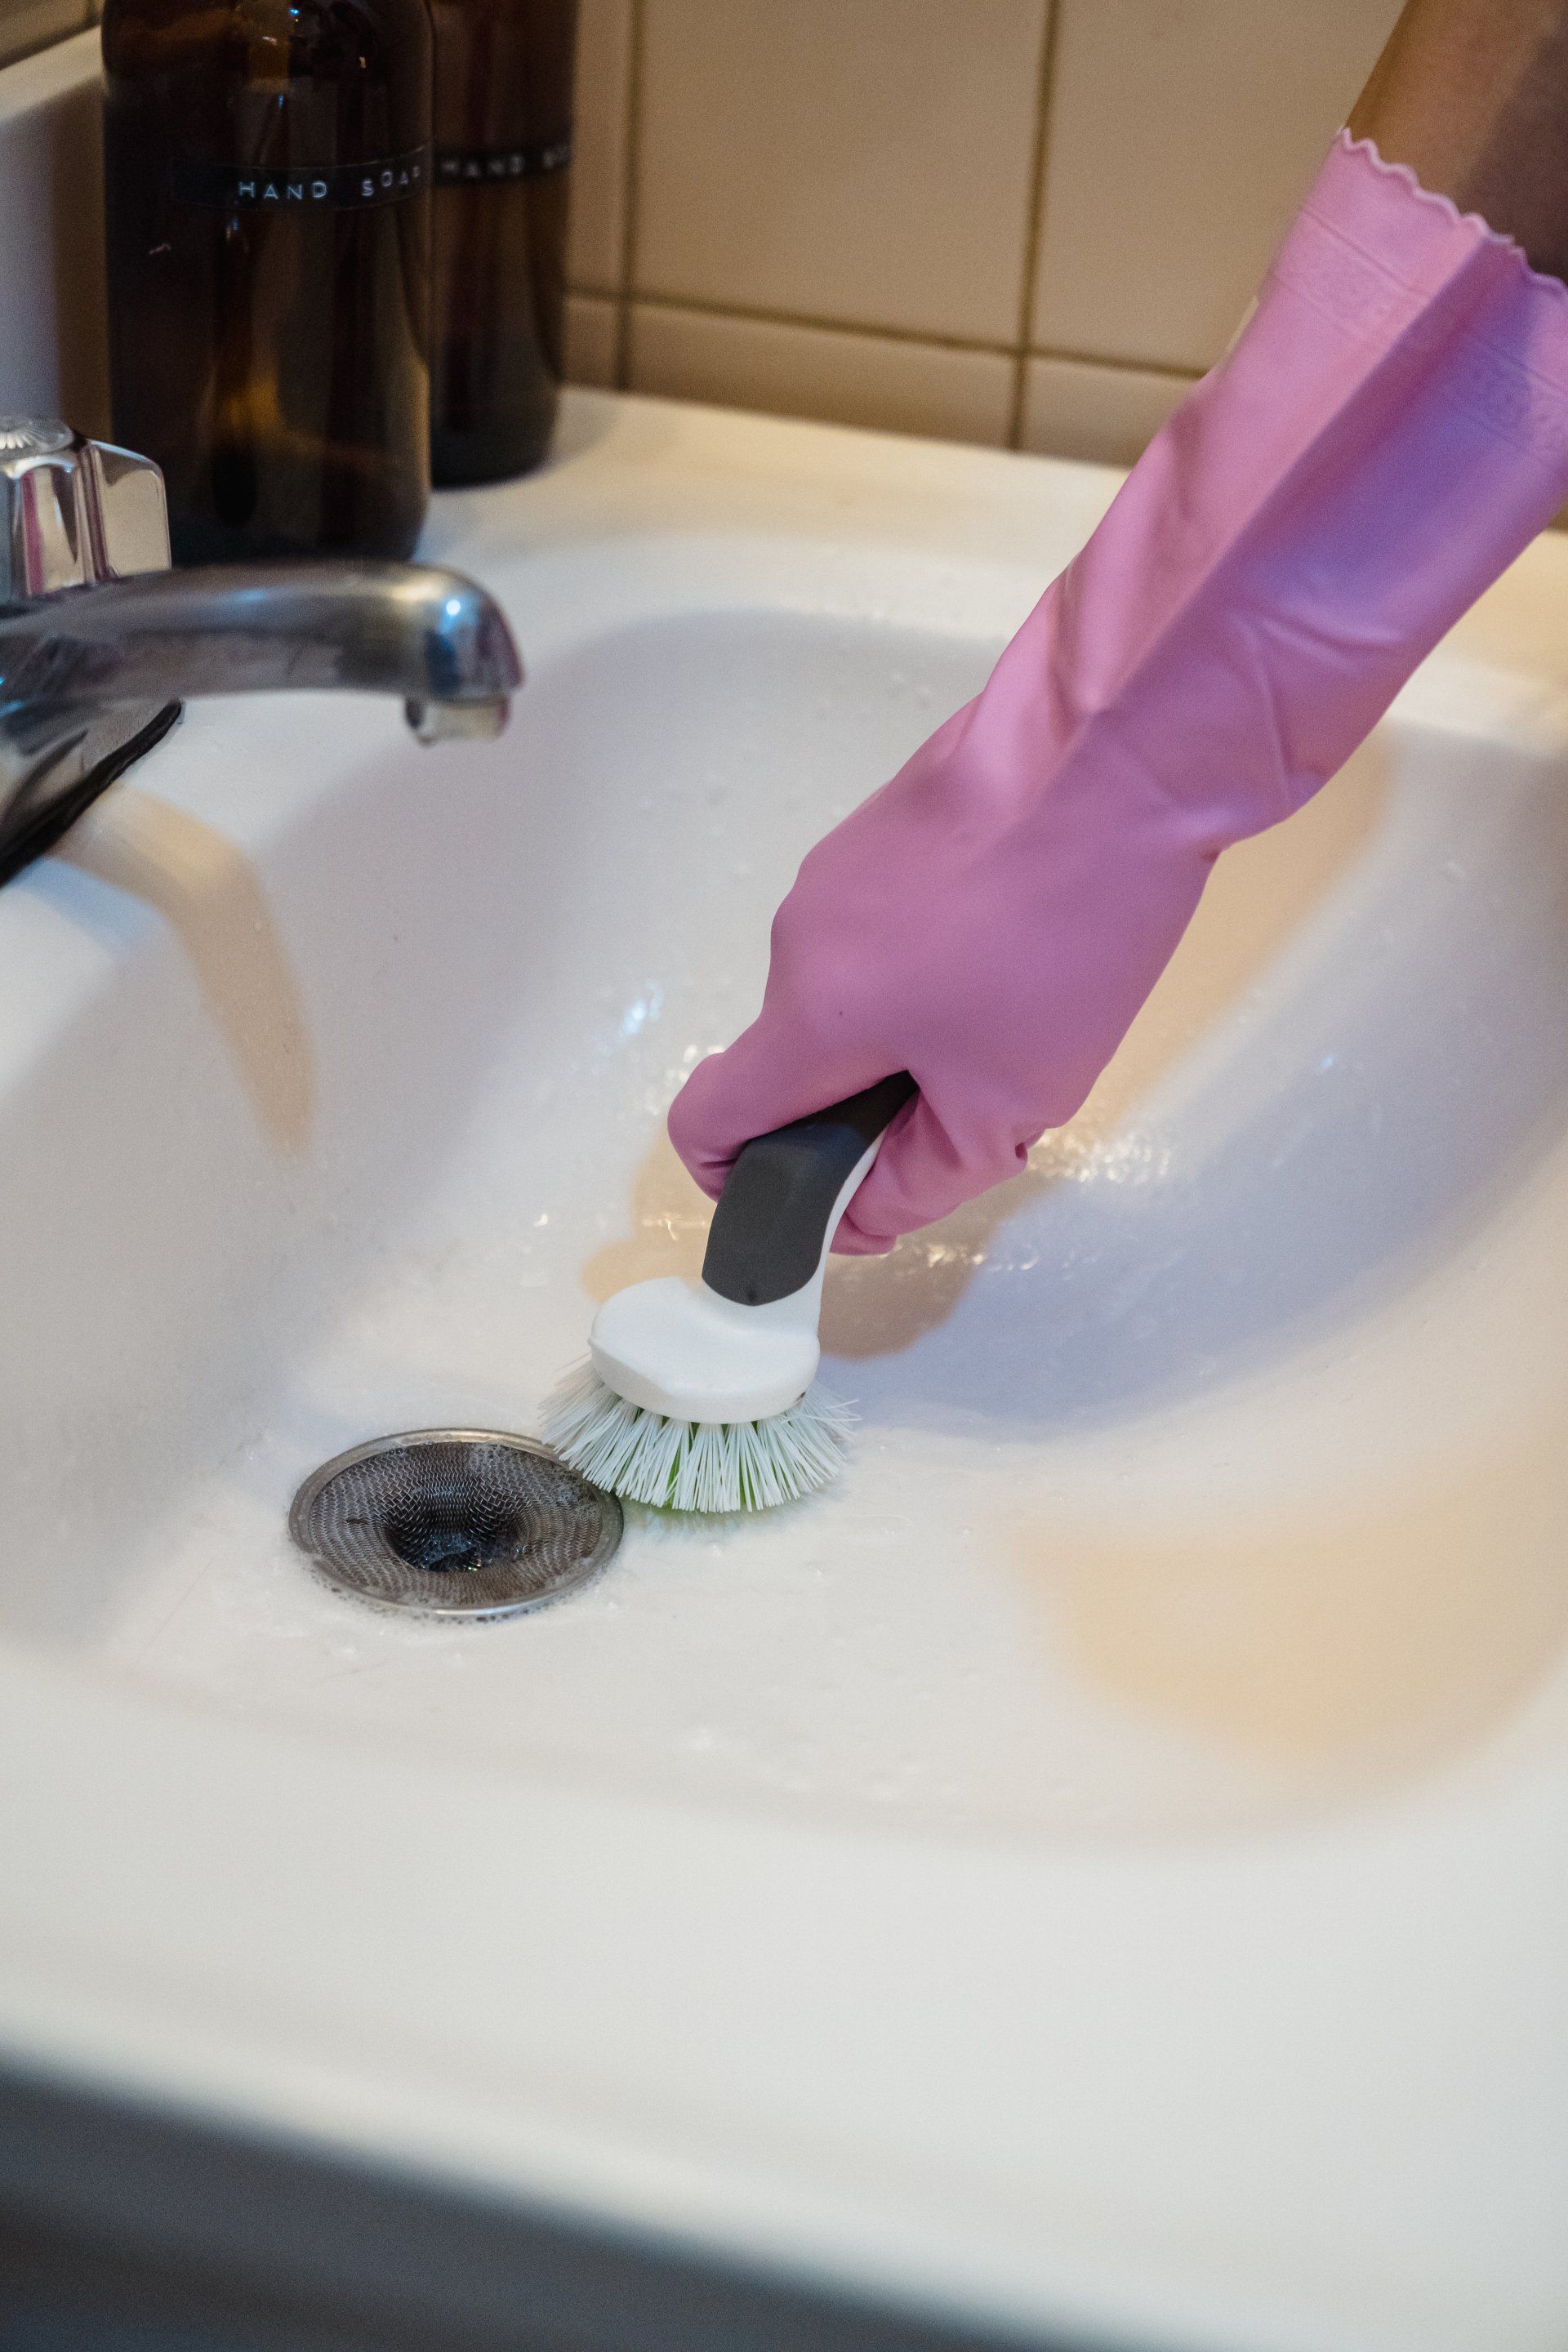 The Importance of Regular Drain Cleaning and Maintenance